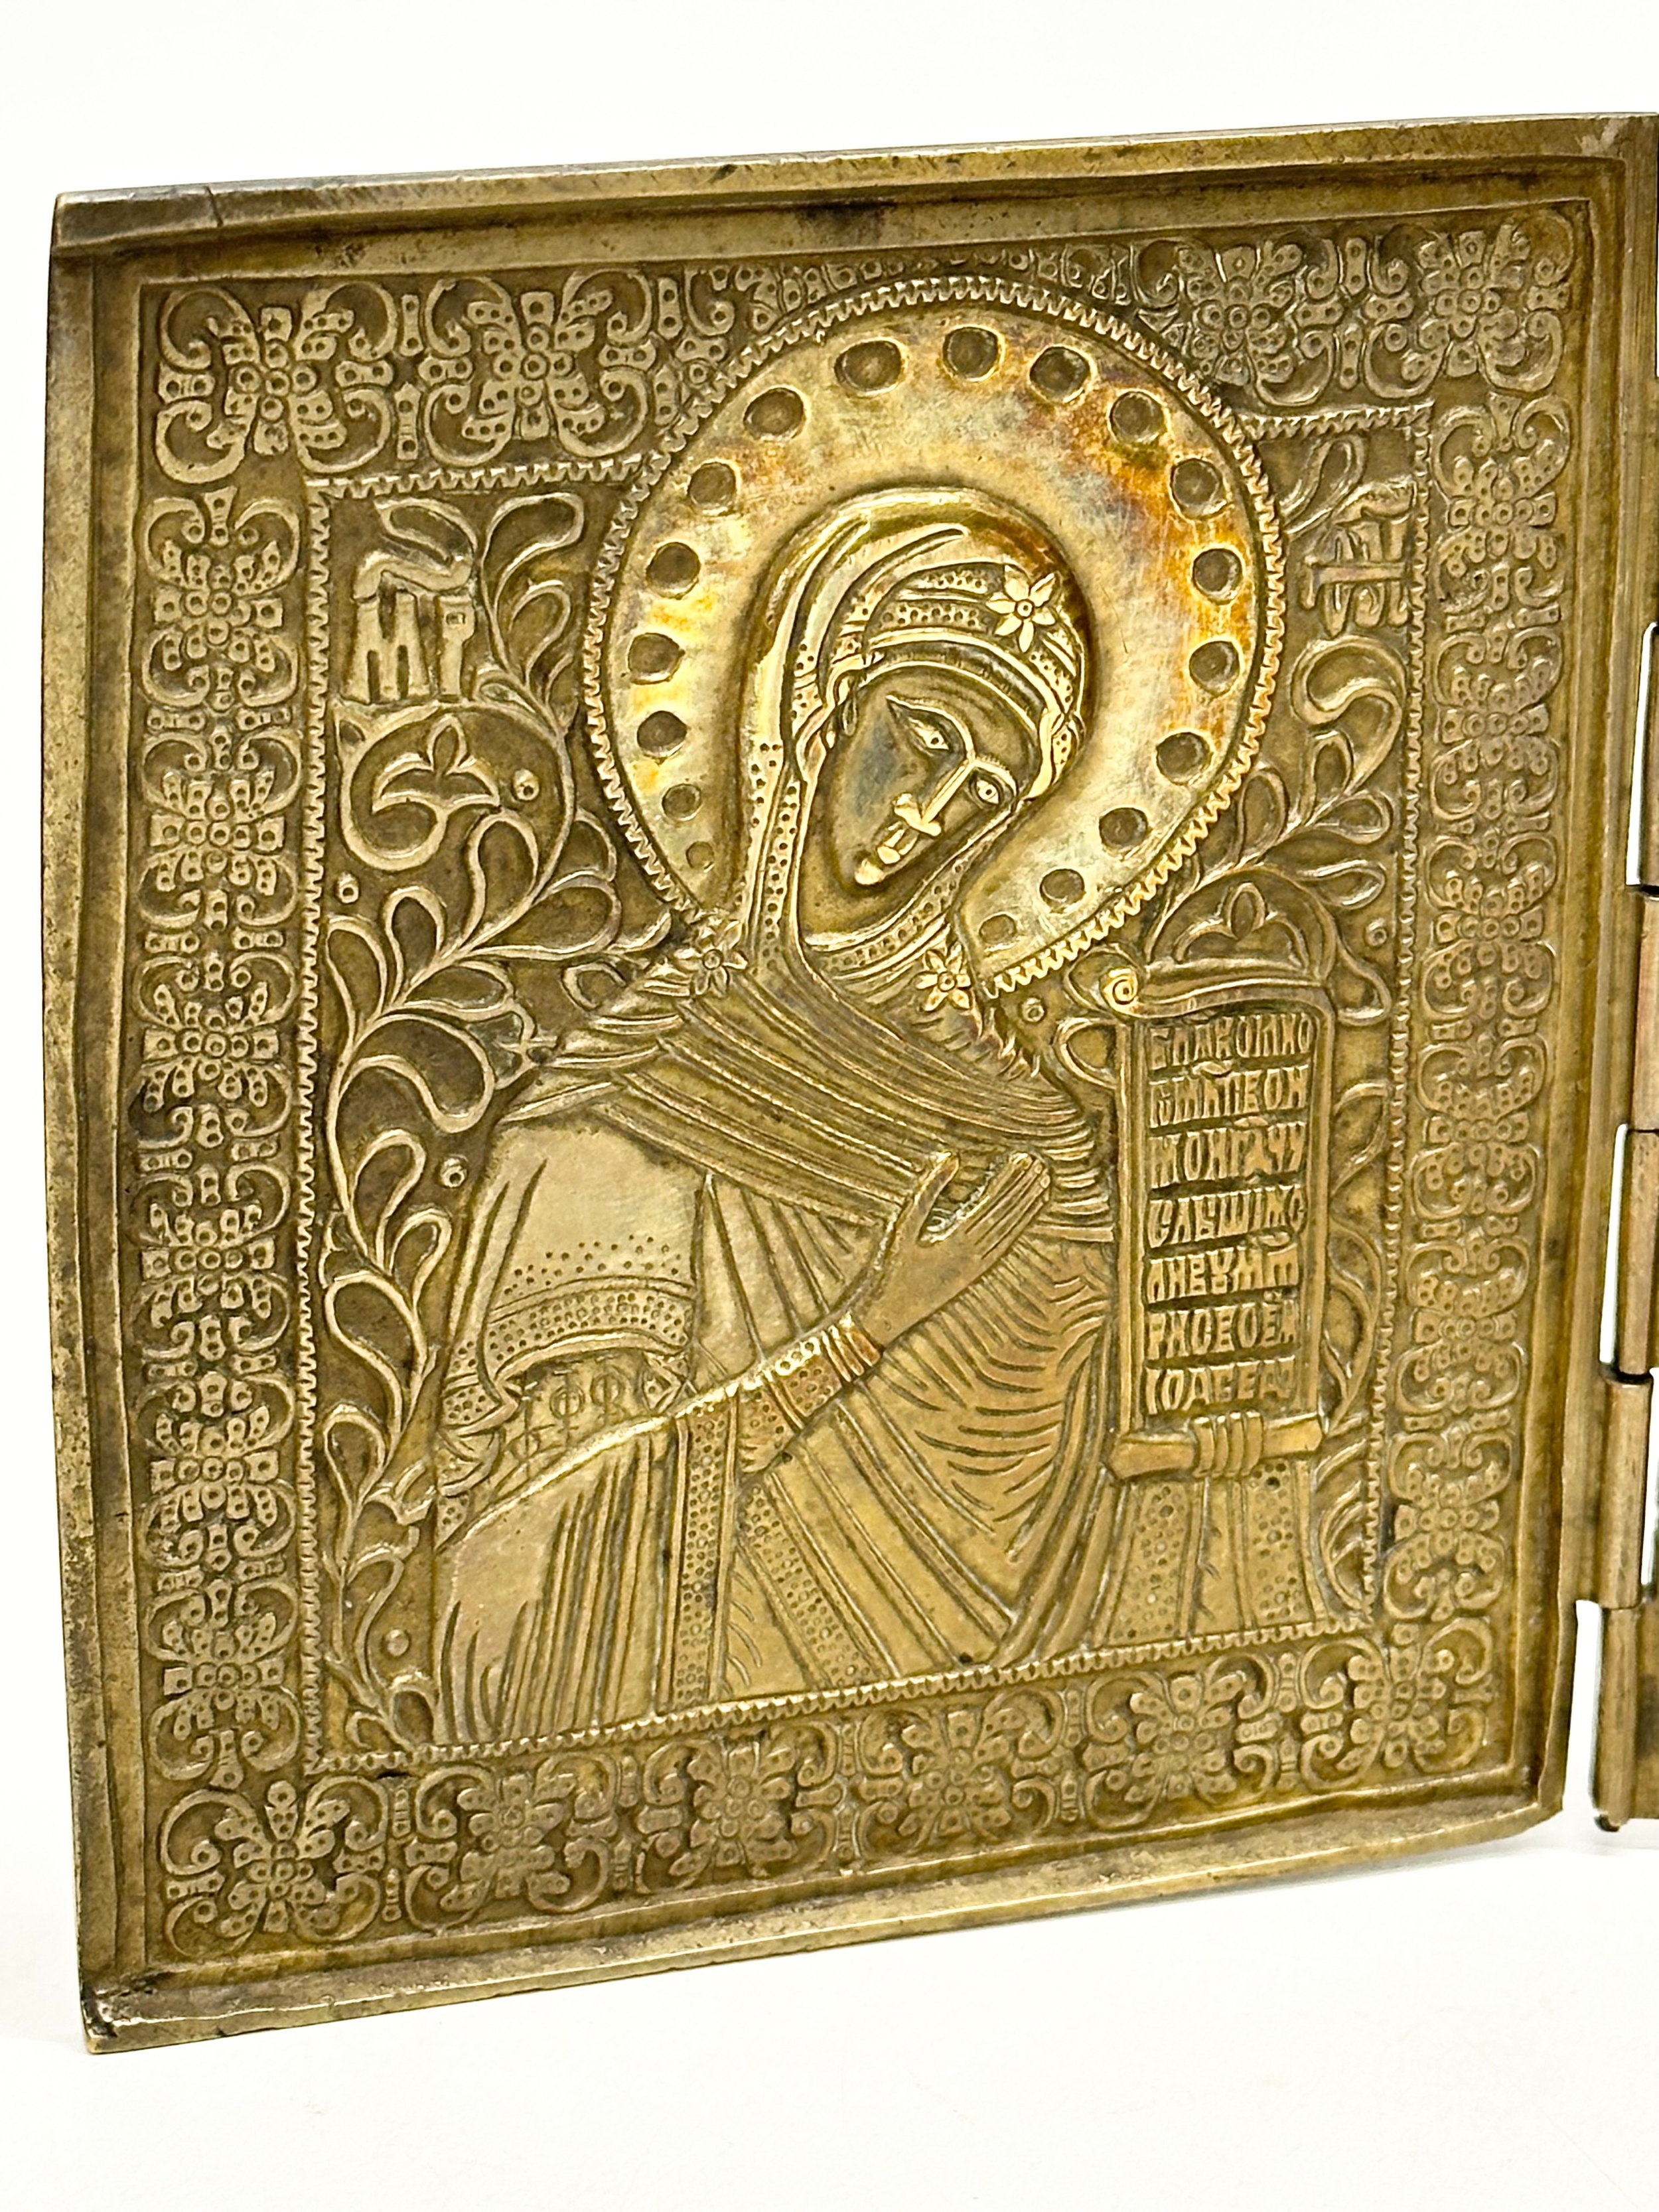 A Late 18th/Early 19th Century Russian Triptych brass religious icon. Open 36.5cm. 13x14.5cm closed. - Image 5 of 11